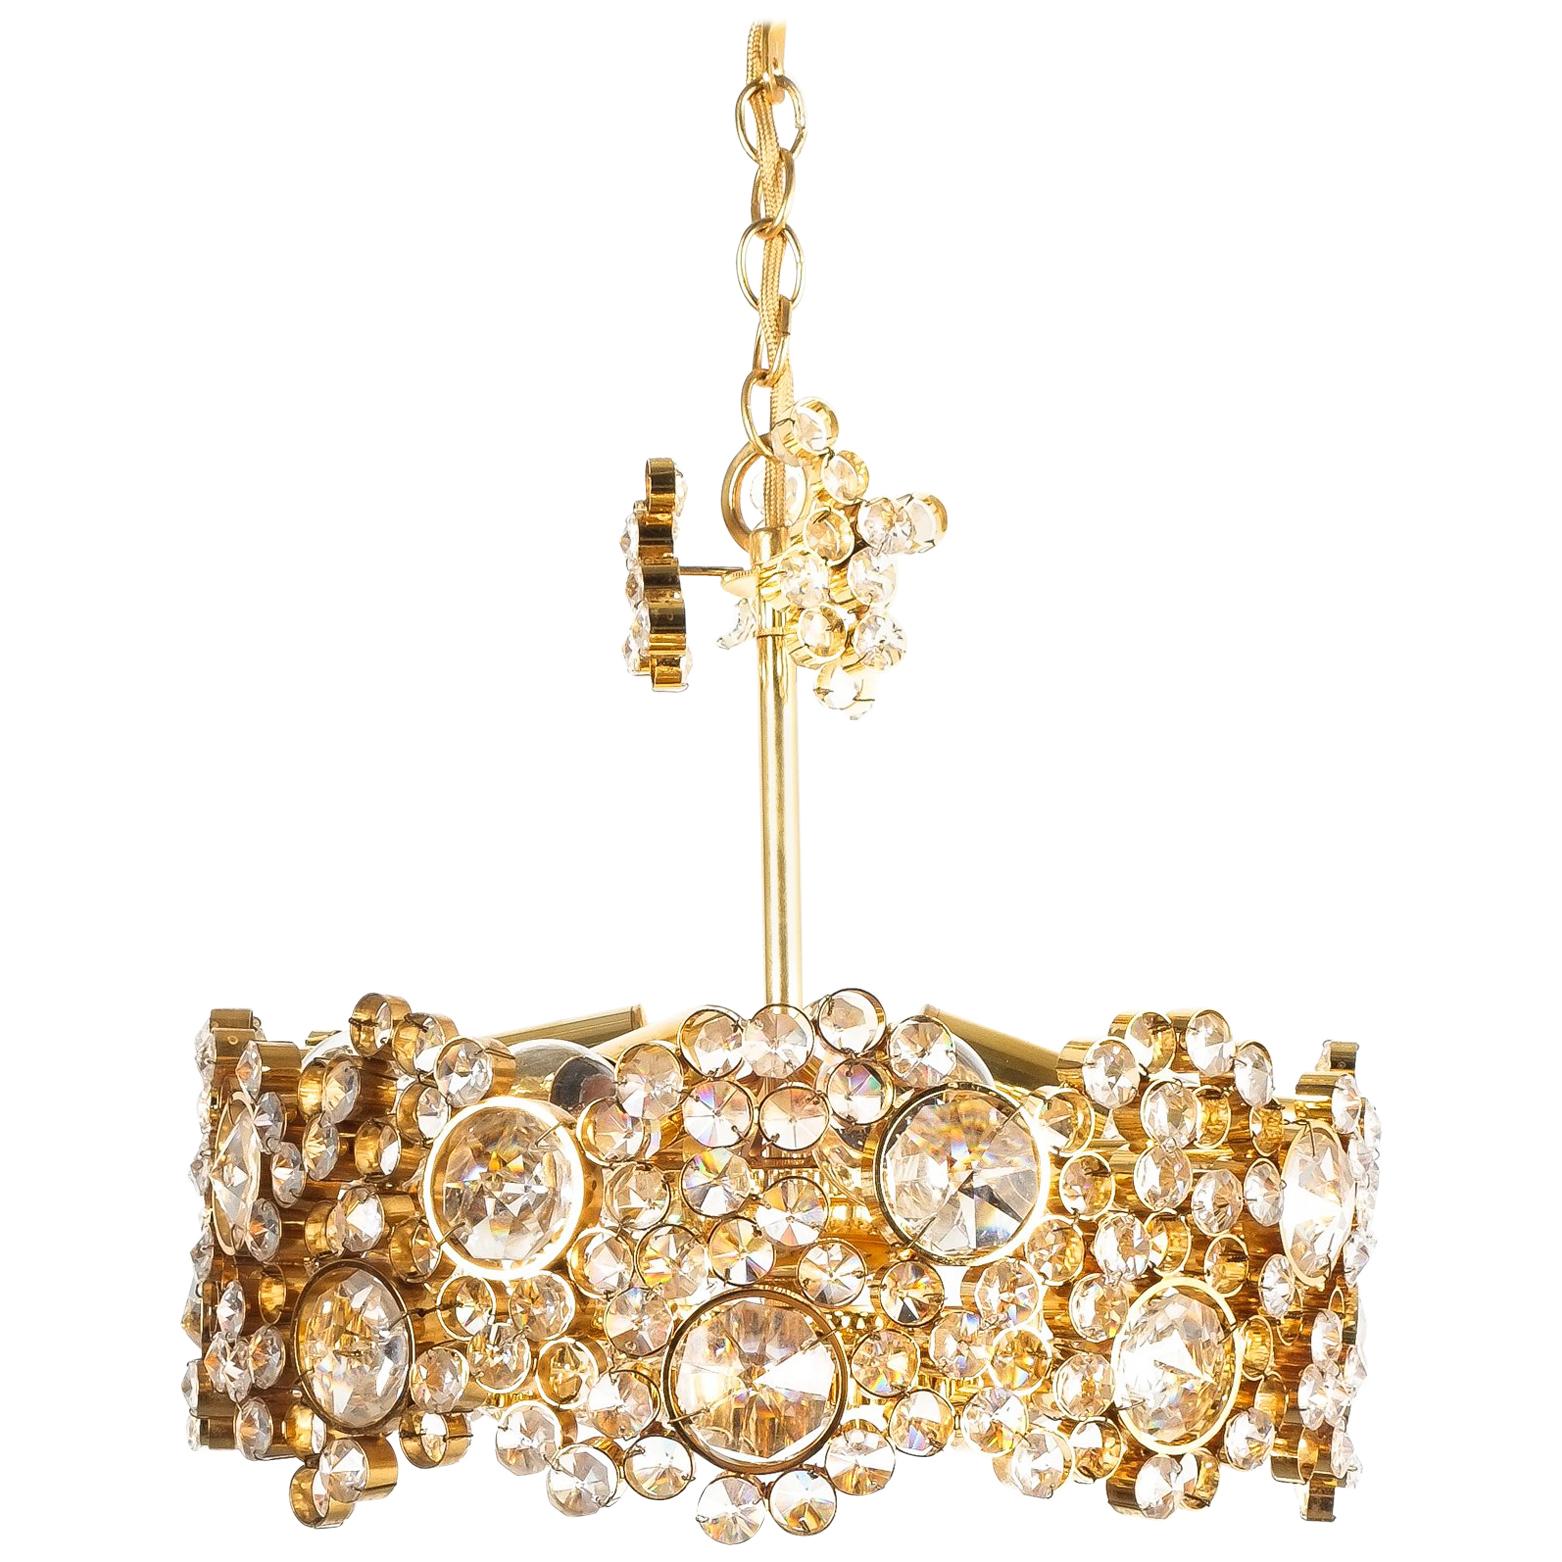 Palwa Crystal Glass Gold-Plated Brass Chandelier Refurbished Lamp